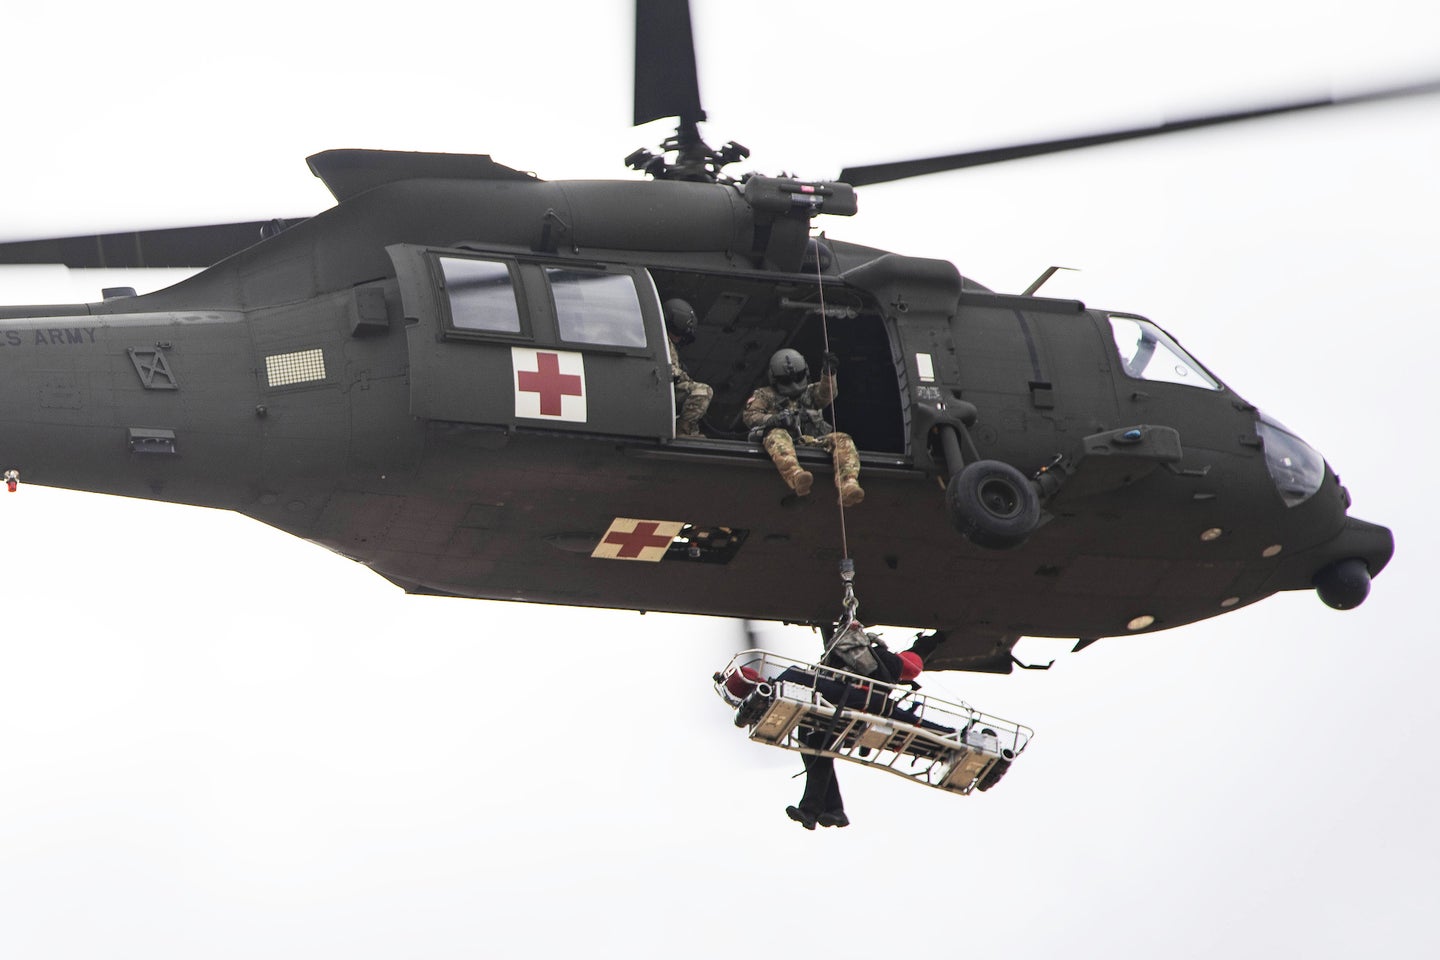 A Black Hawk helicopter with a rescue basket beneath it.